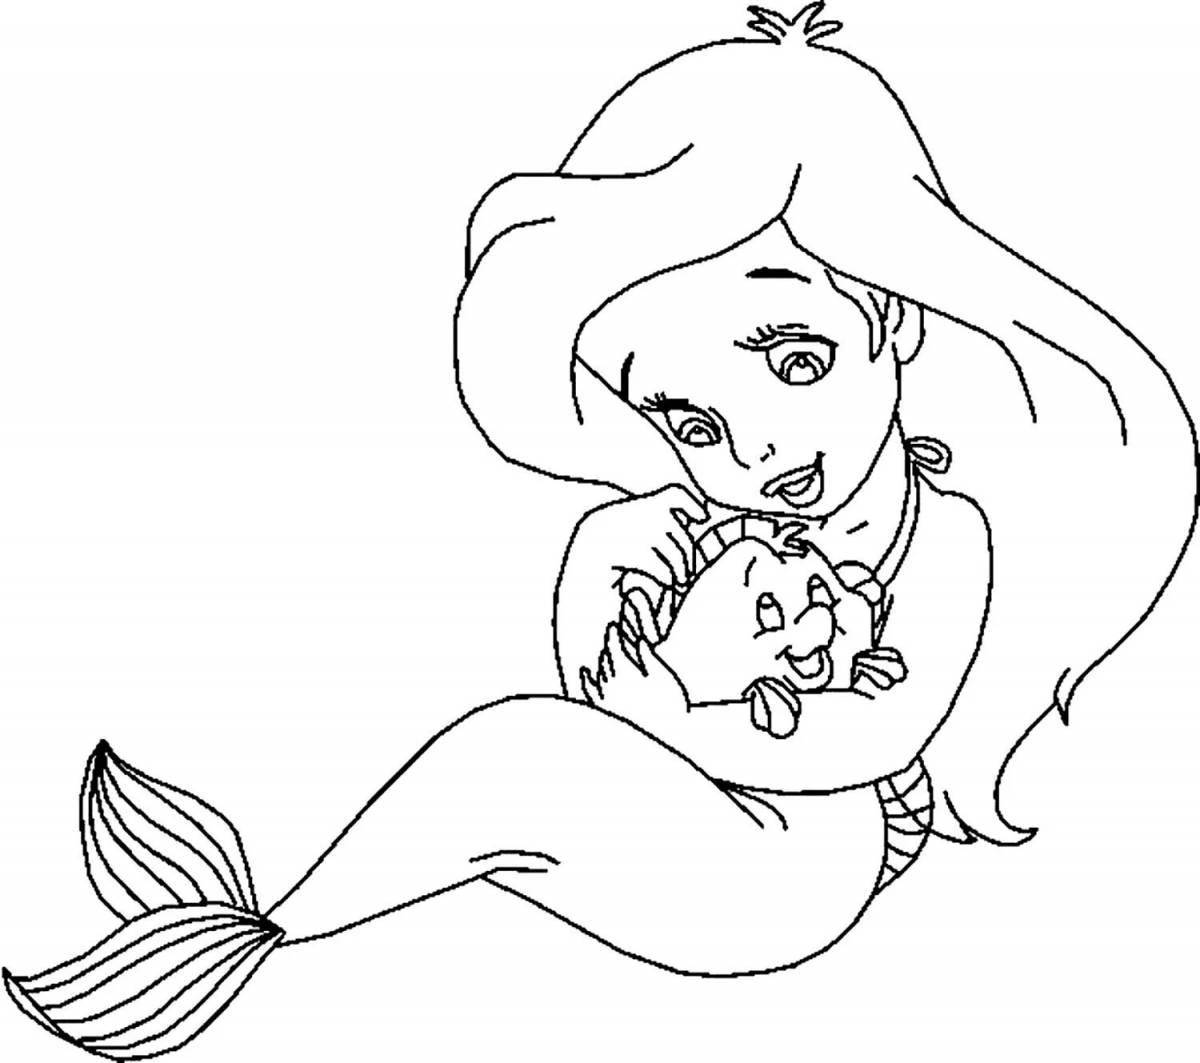 Exotic coloring book for girls little mermaid